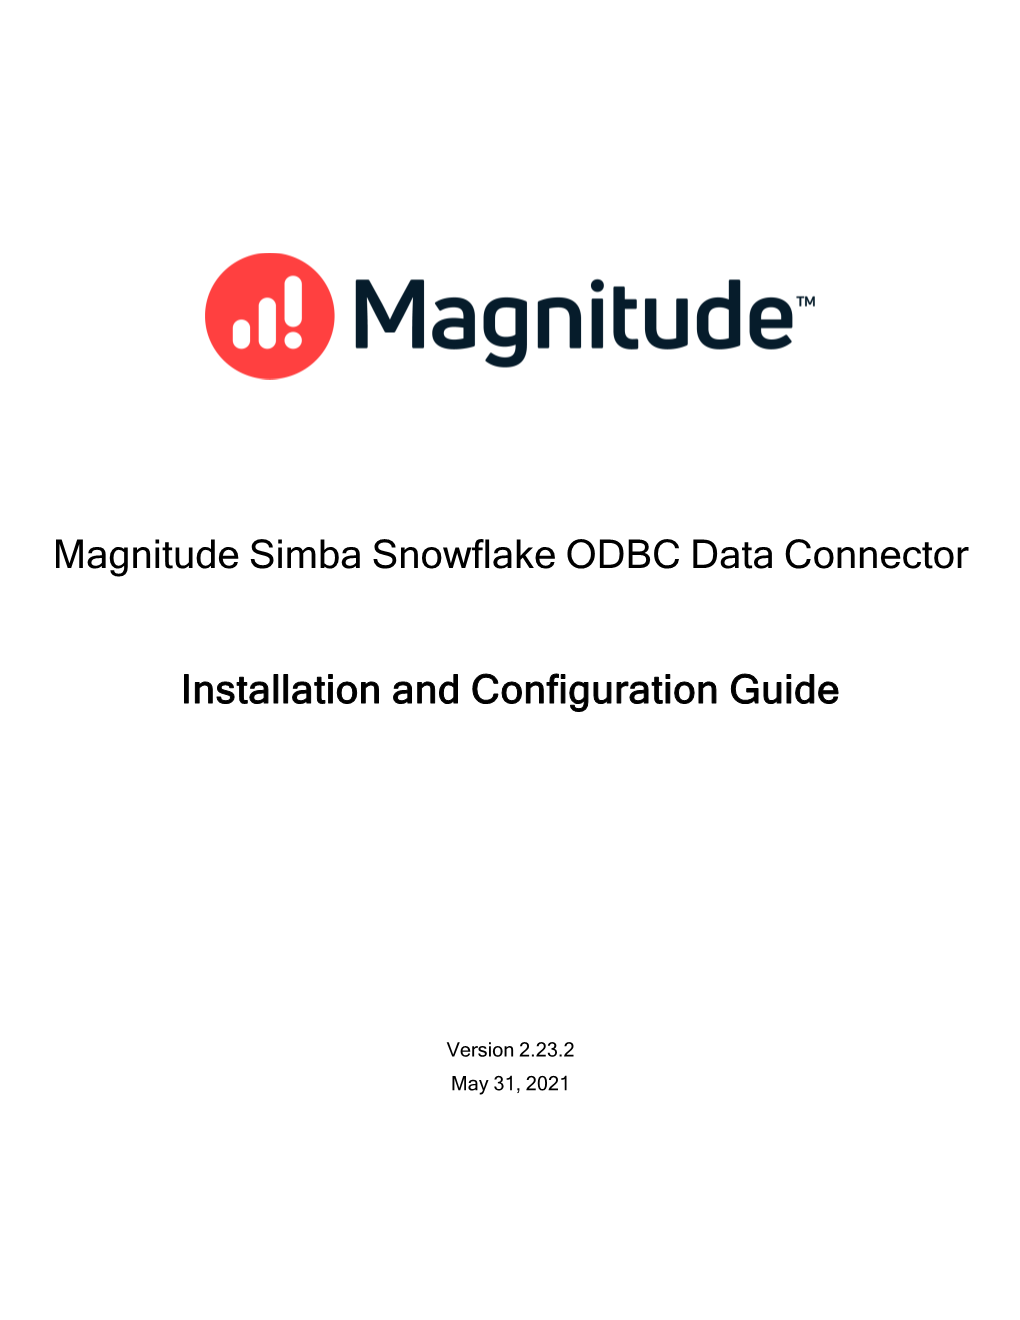 Simba Snowflake ODBC Data Connector Installation and Configuration Guide Explains How to Install and Configure the Magnitude Simba Snowflake ODBC Data Connector